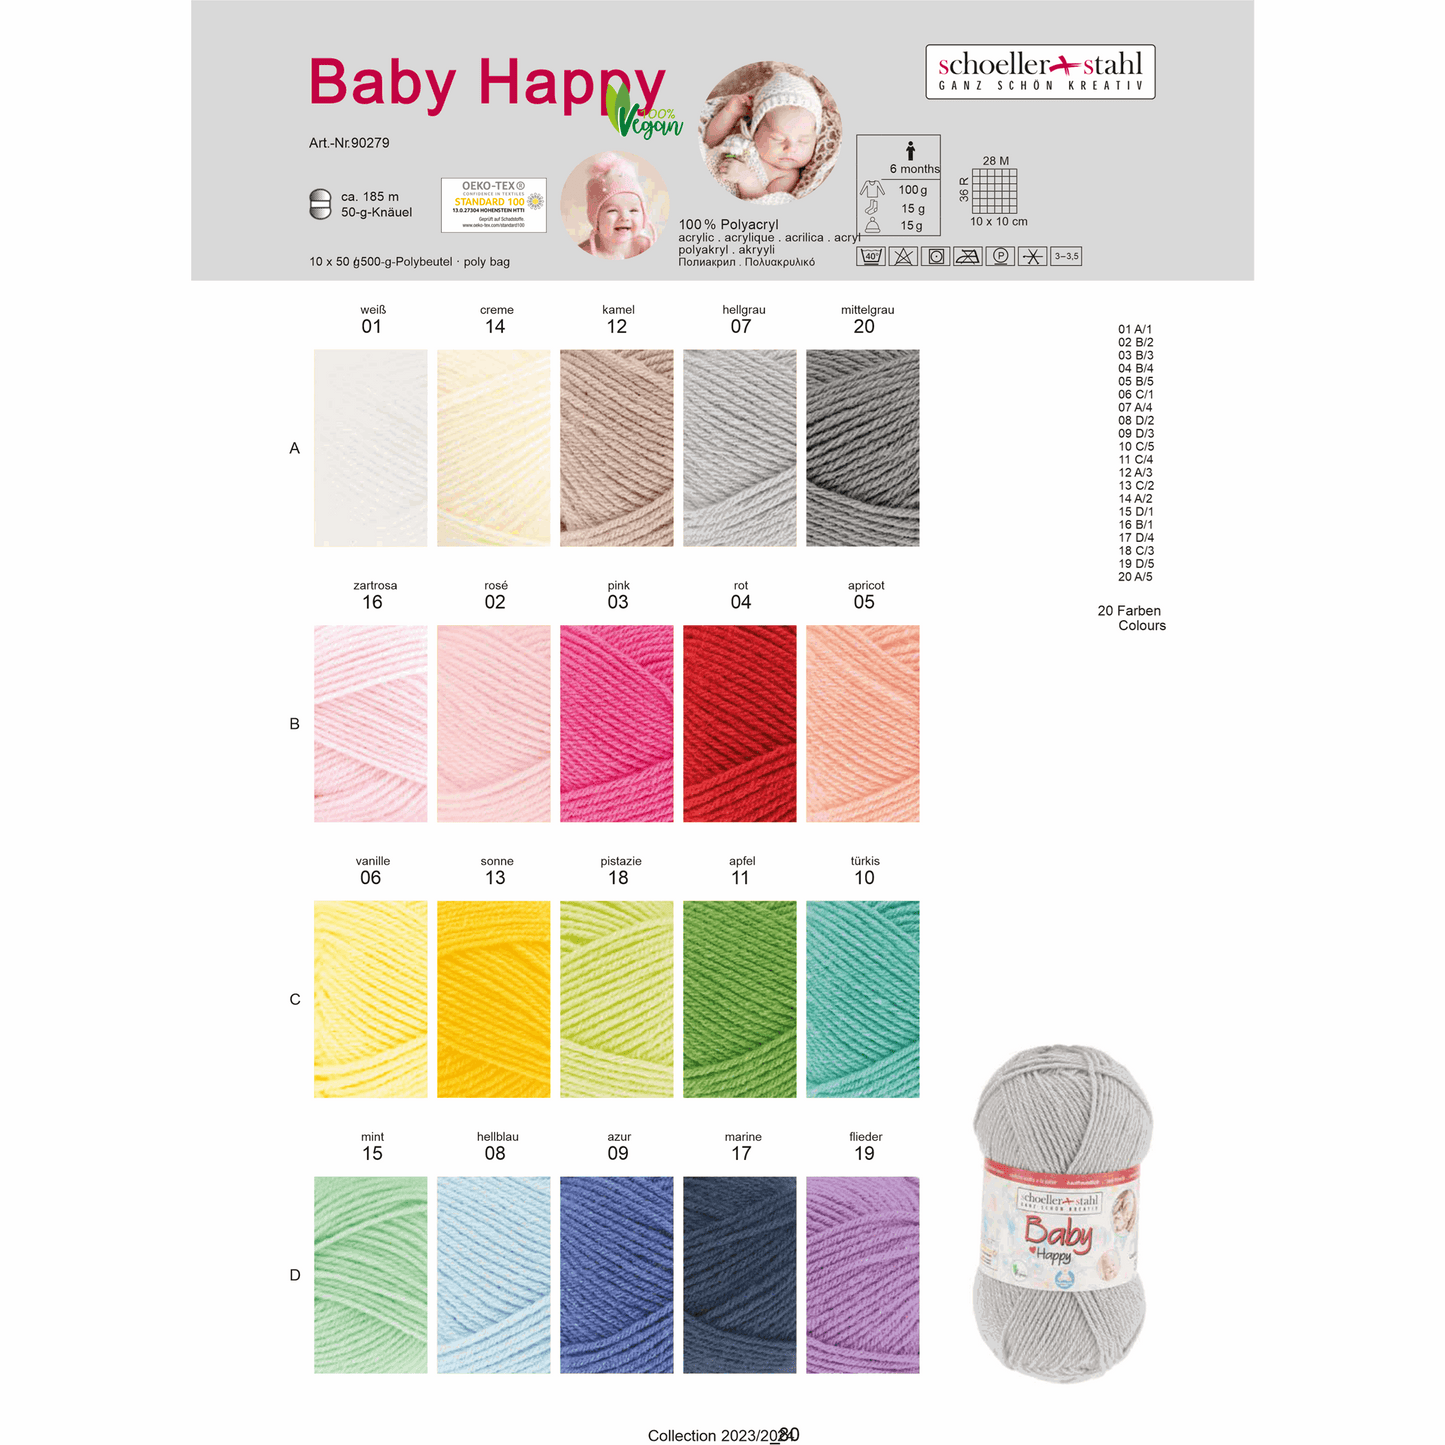 Baby happy 50g, 90279, color 16, soft pink